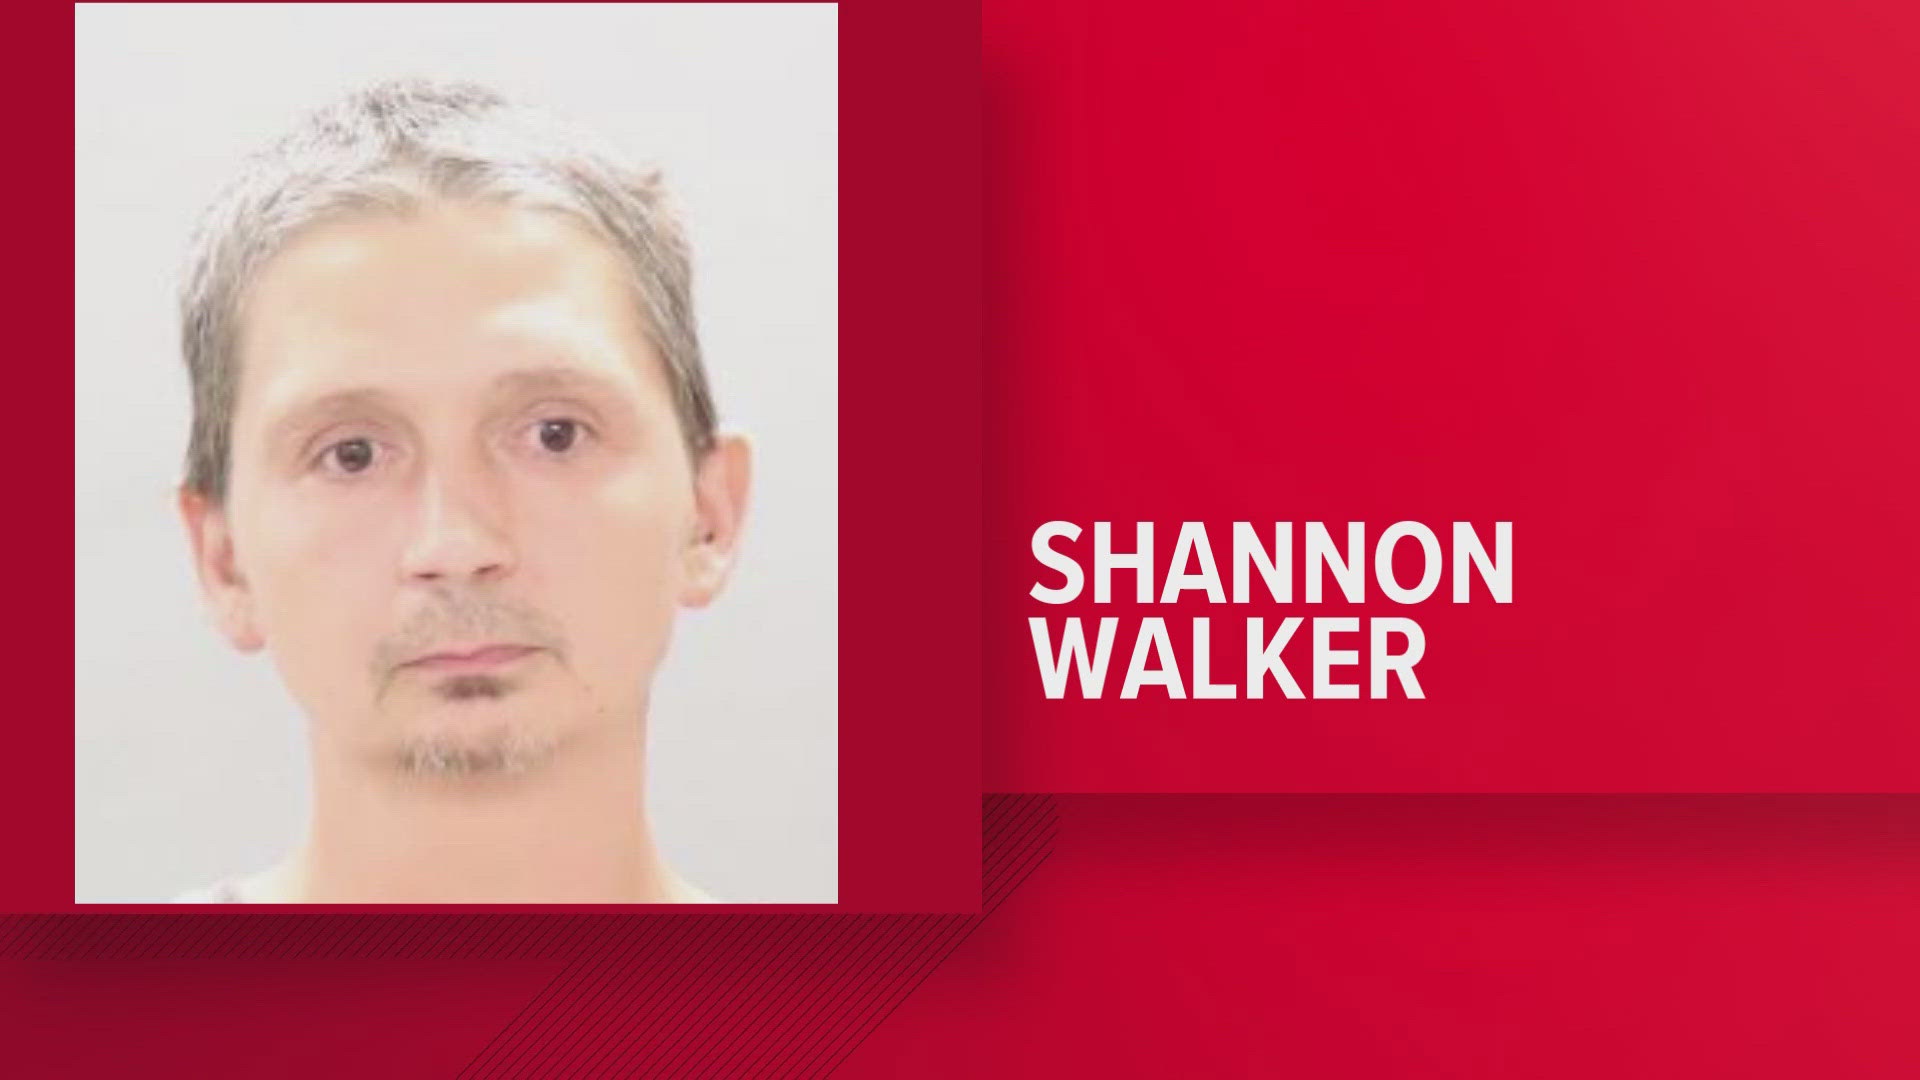 According to court documents, Shannon Walker faces a dozen counts including vehicular homicide, reckless endangerment and driving under the influence.